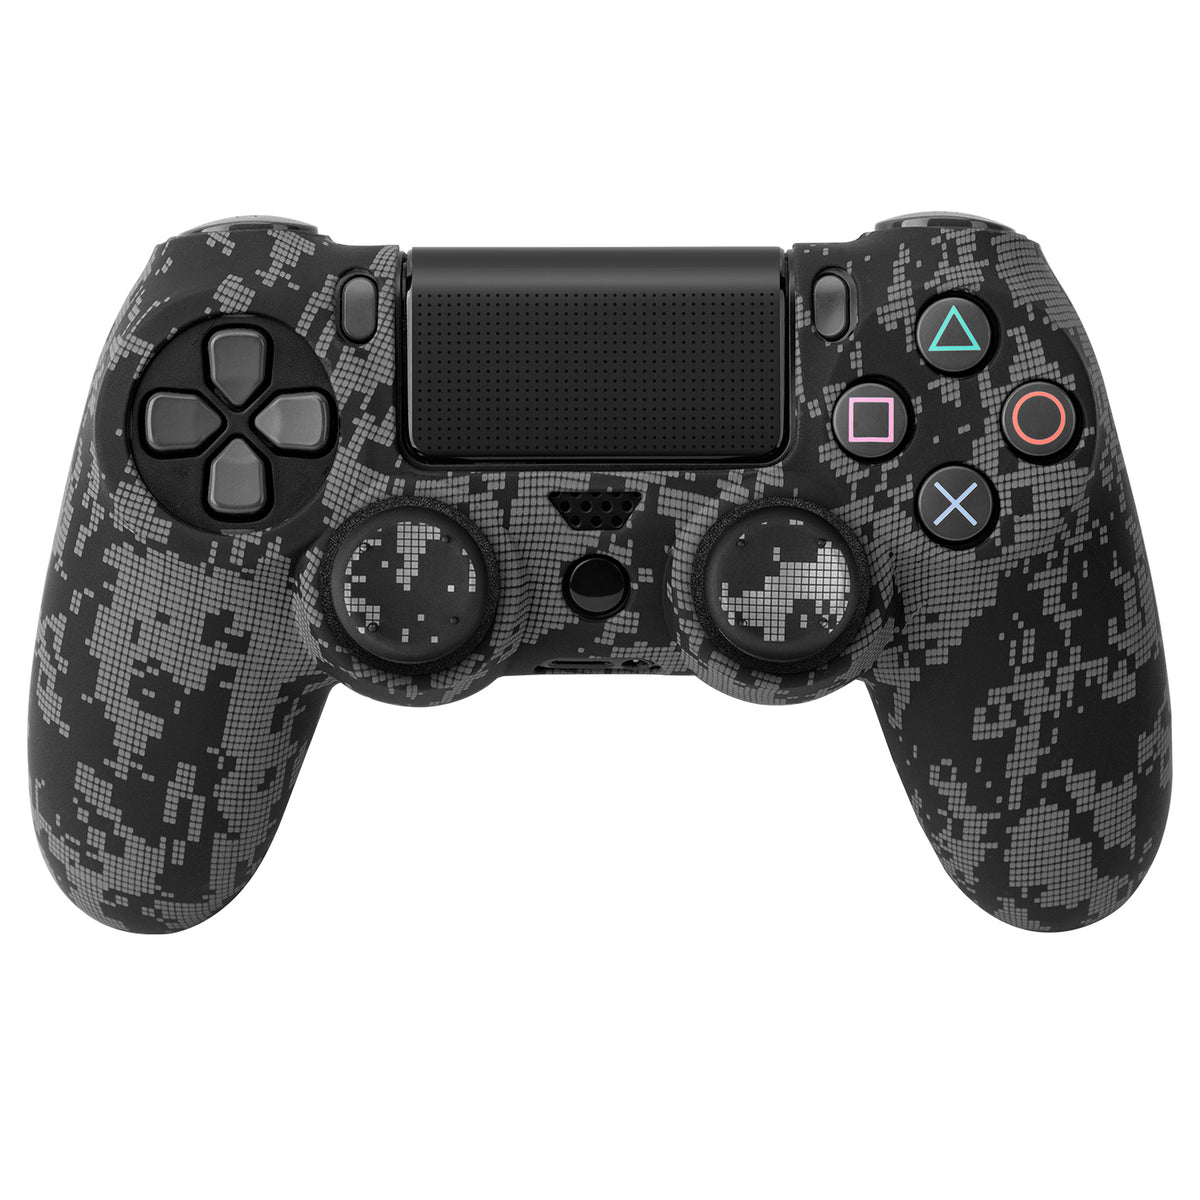 Casque gaming Nemesis Camo - PS4 - Accessoires PS4 - Playstation 4